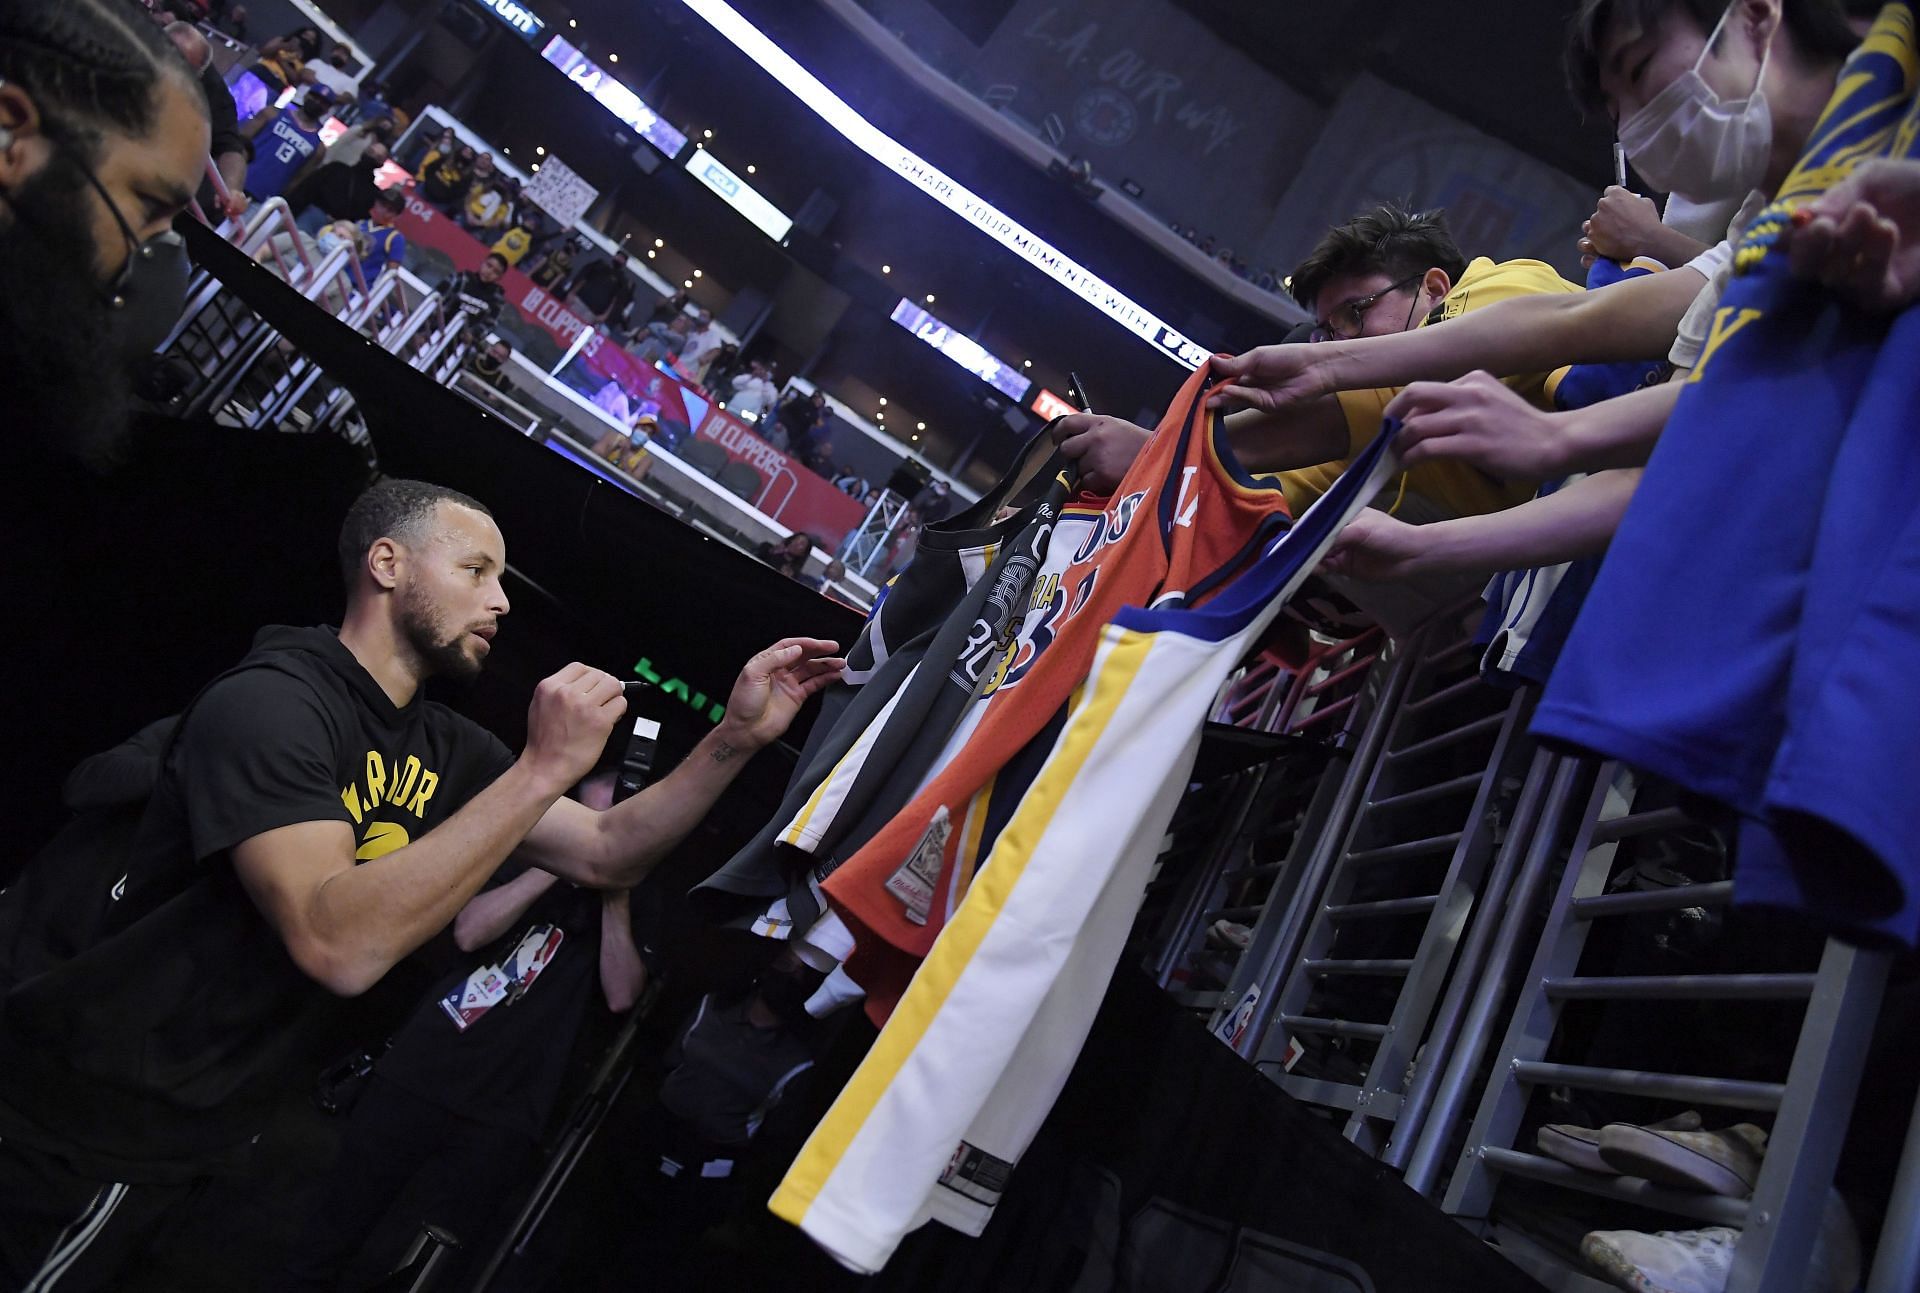 Stephen Curry of the Golden State Warriors signs jerseys at Staples Center